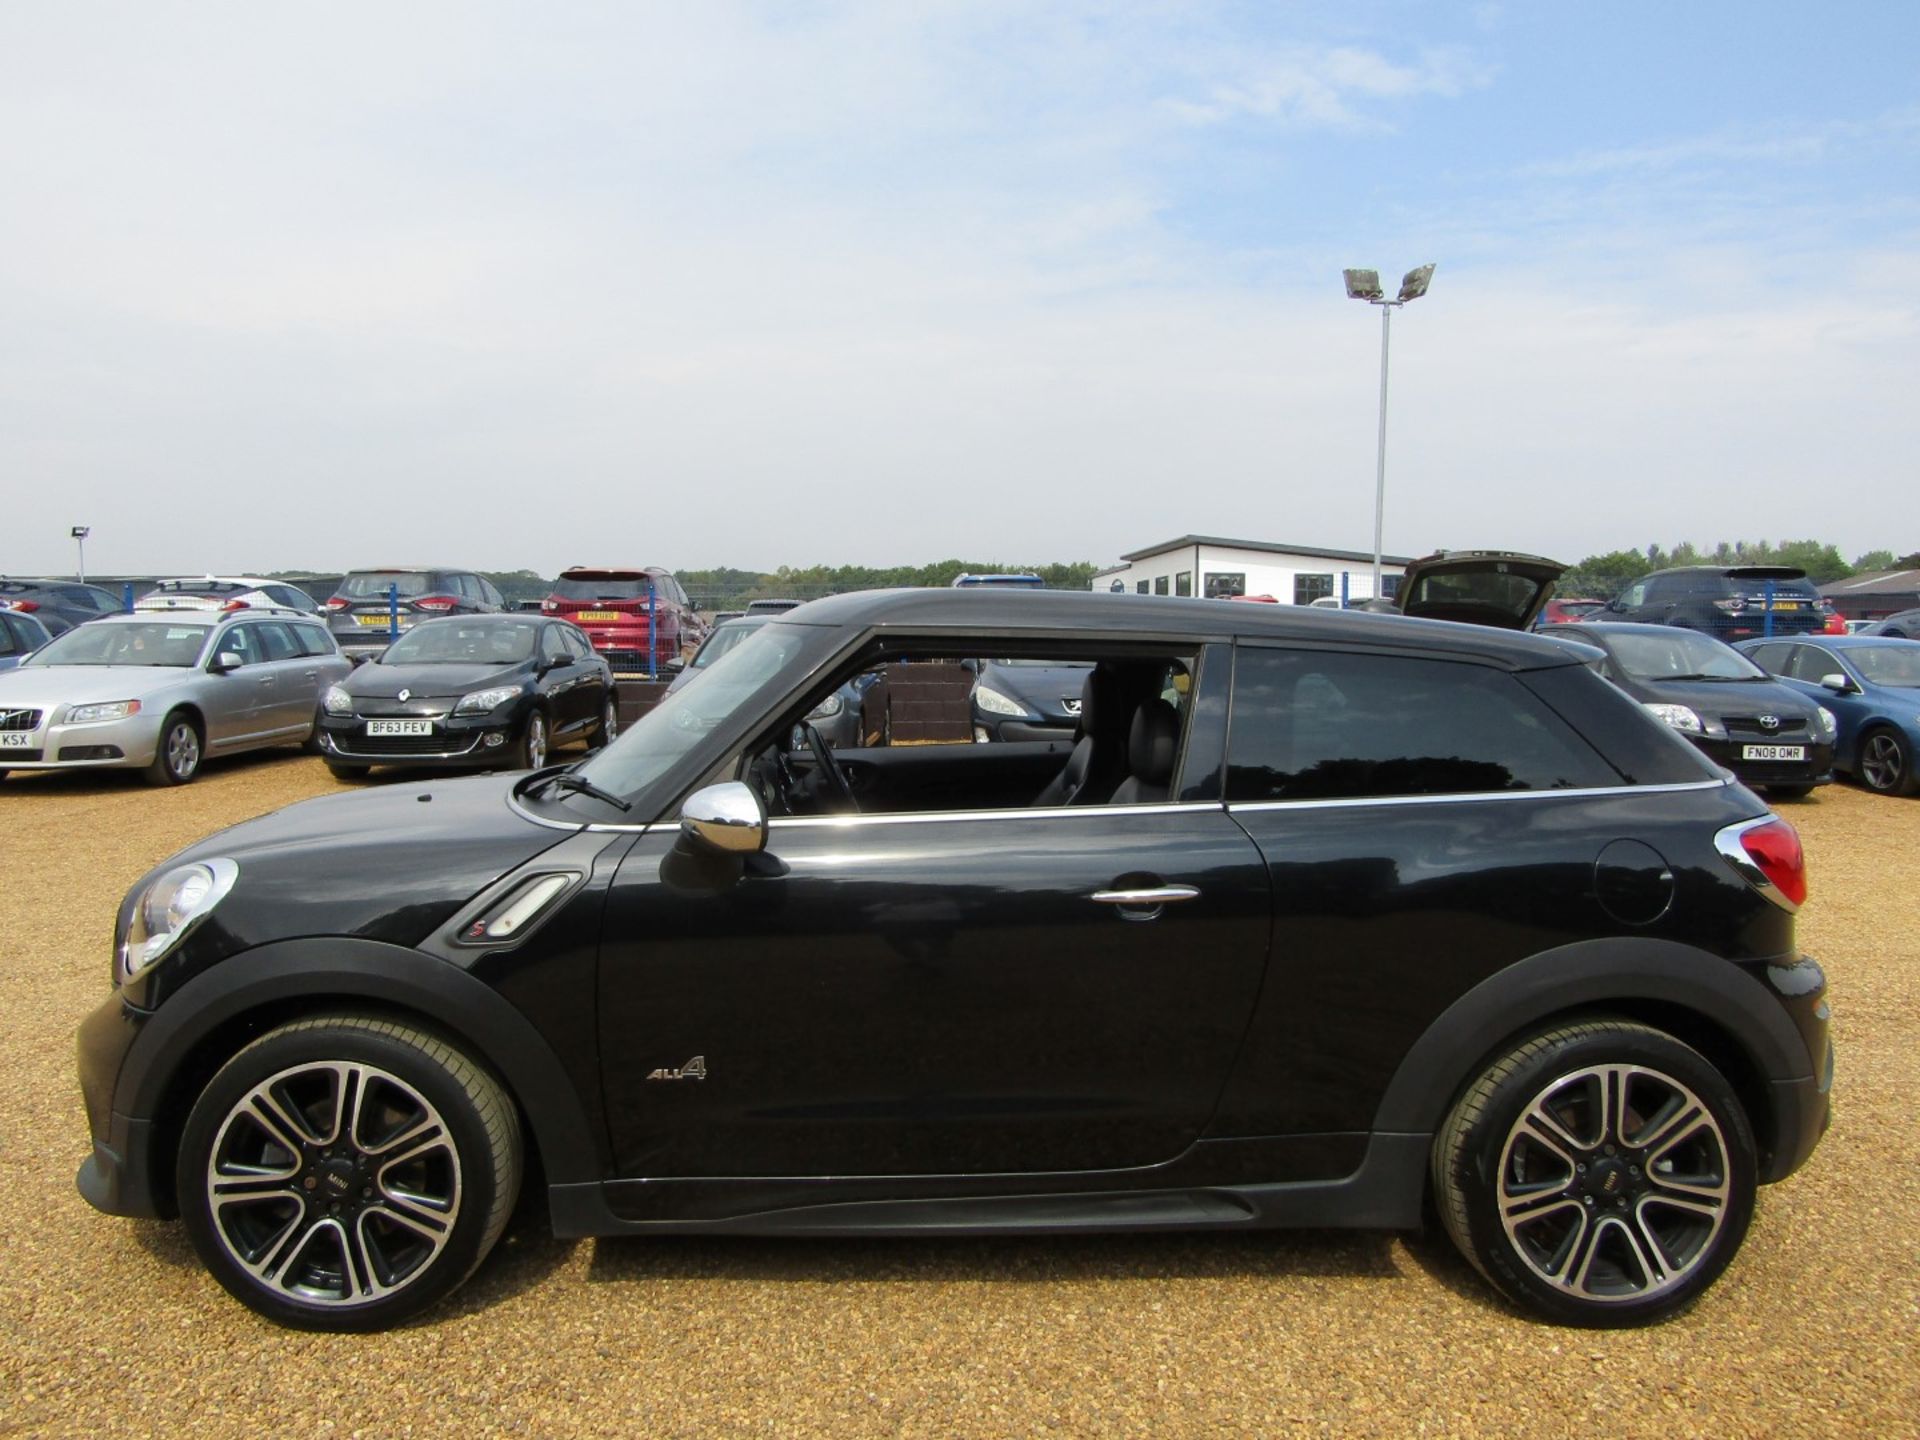 63 13 Mini Paceman Cooper S All4 - Image 23 of 23